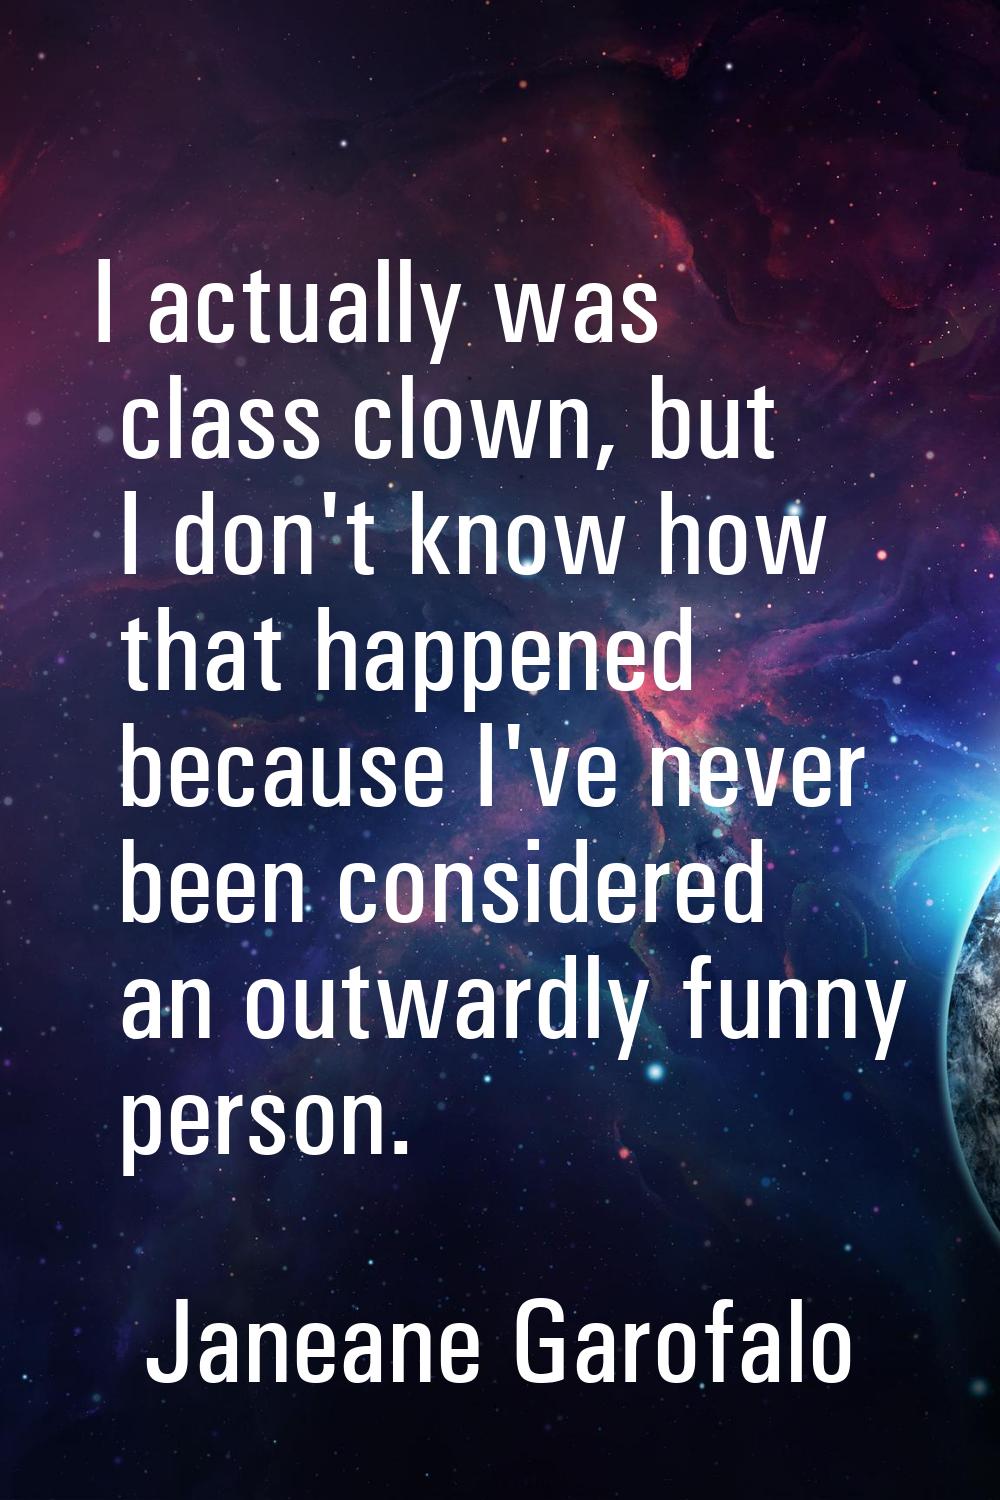 I actually was class clown, but I don't know how that happened because I've never been considered a